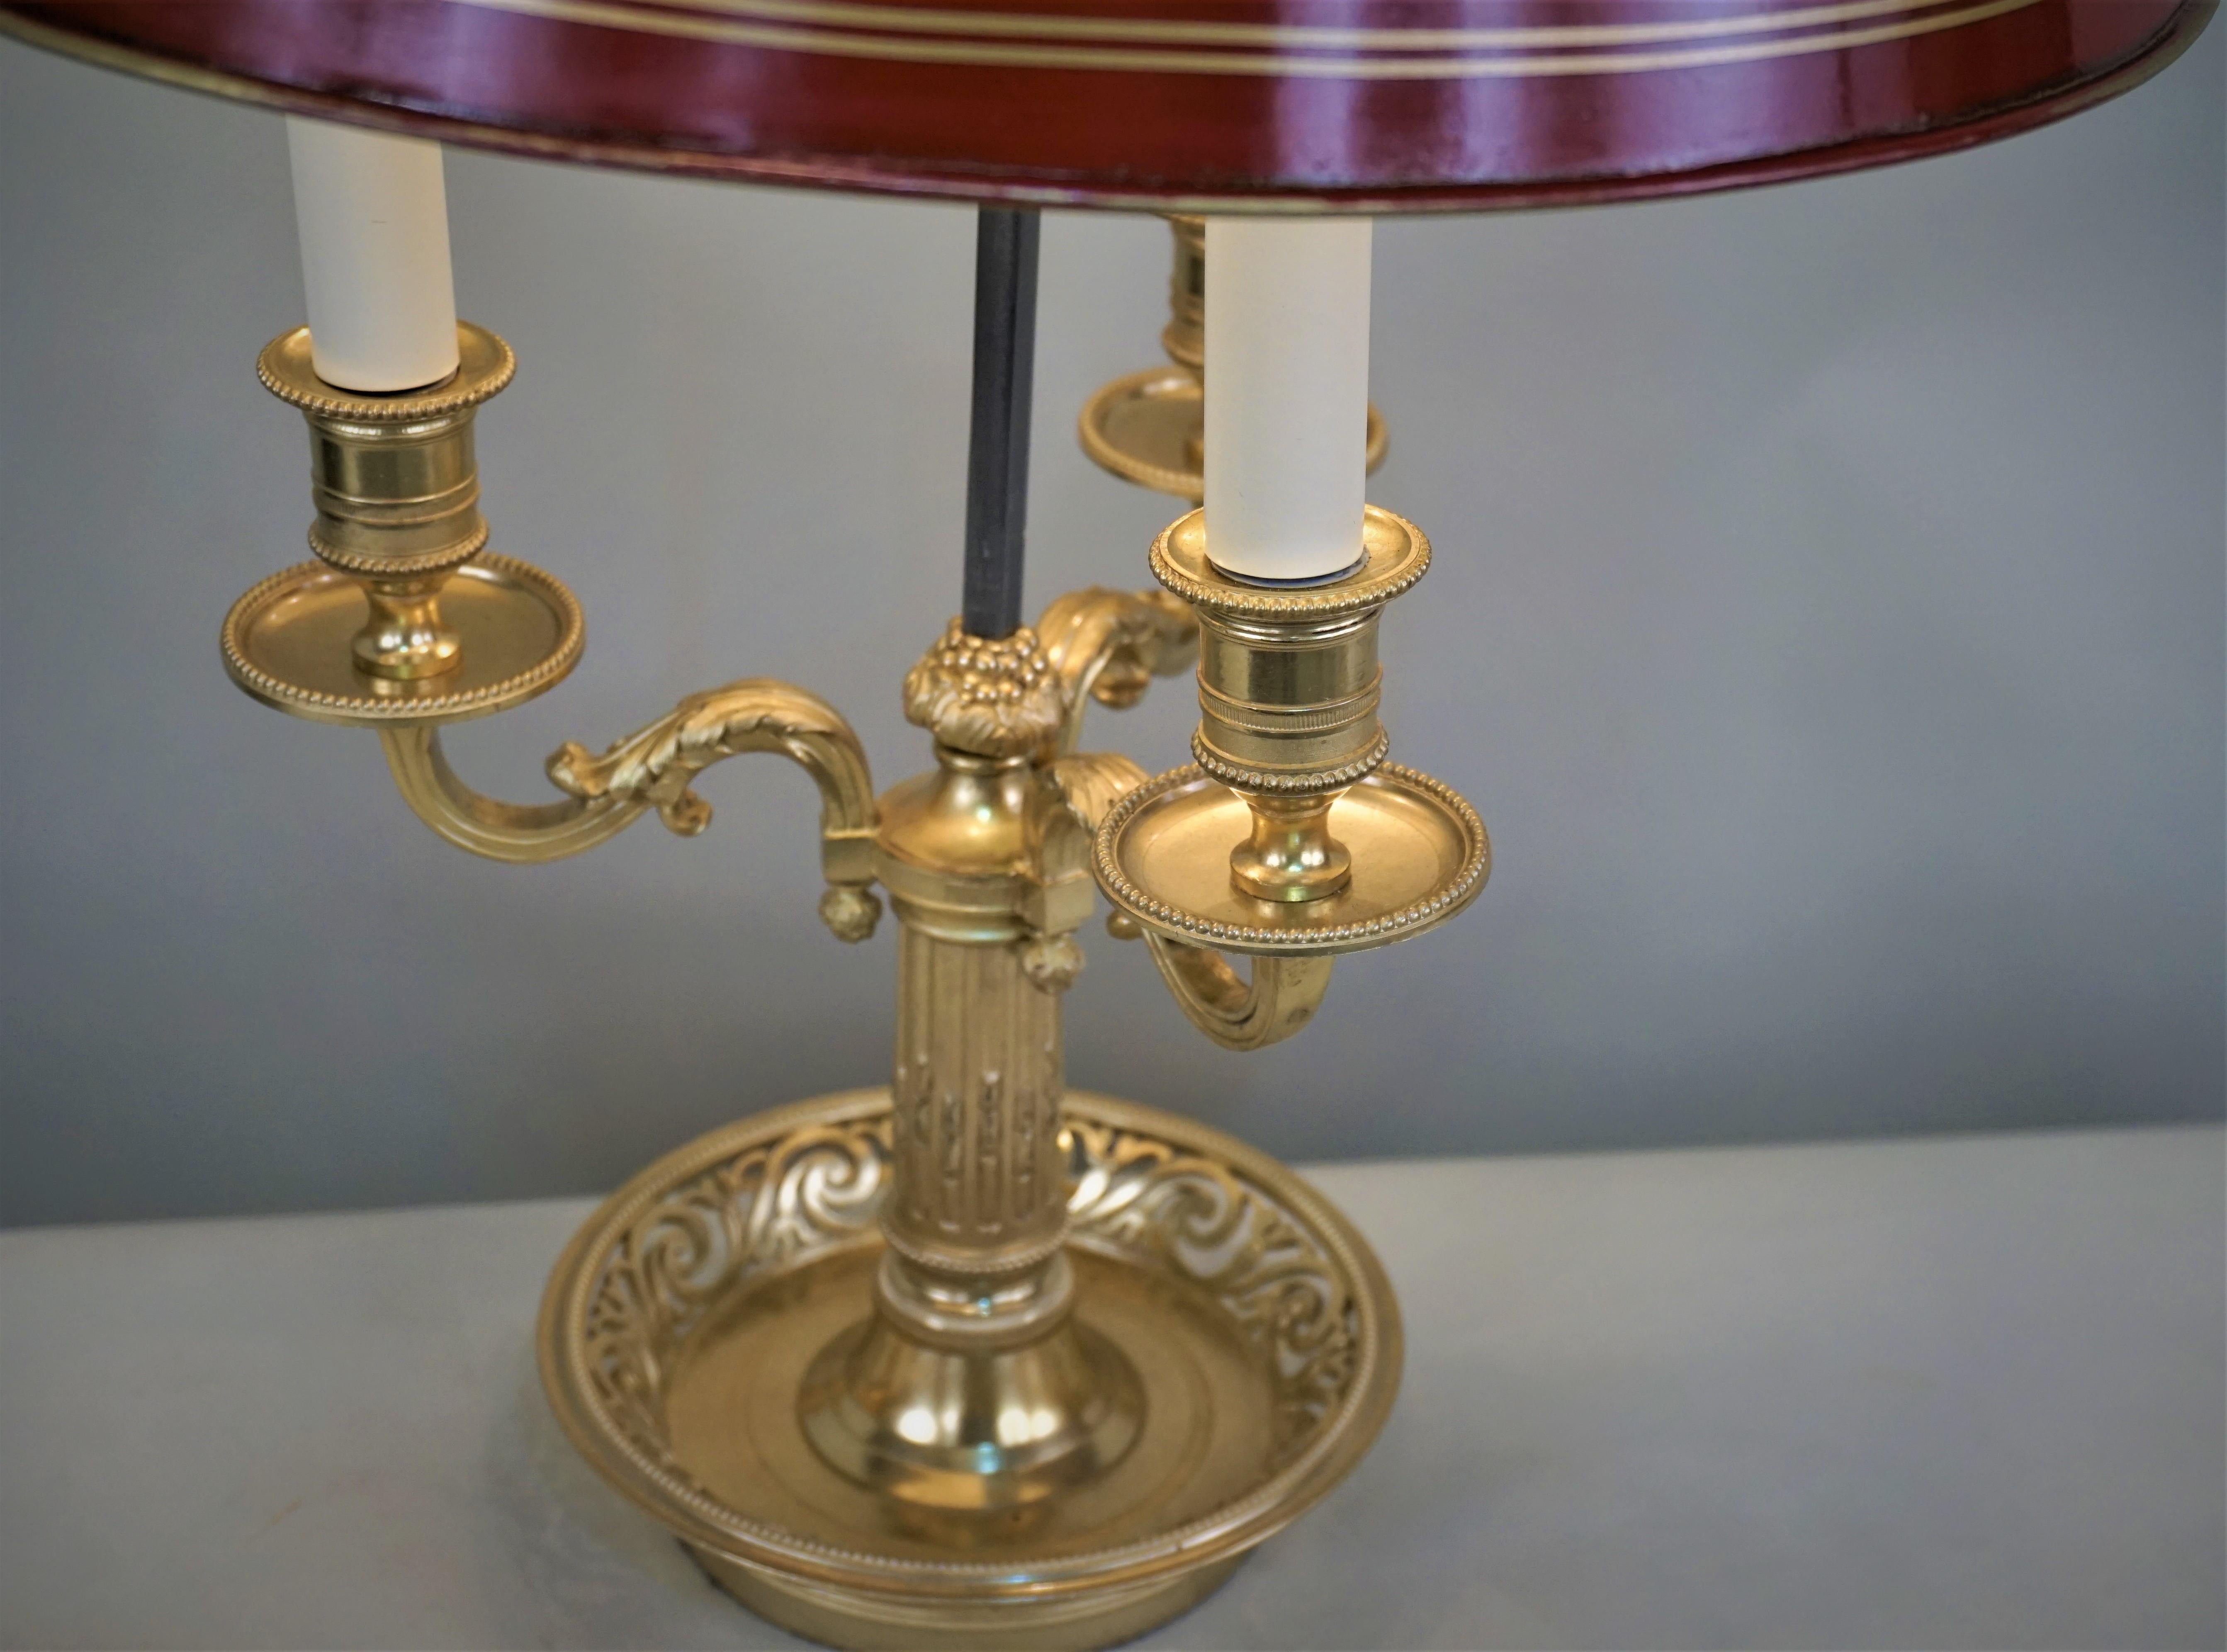 France late 19th-early 20th century high quality cast bronze empire style bouillotte three arm candelabra desk or table lamp.